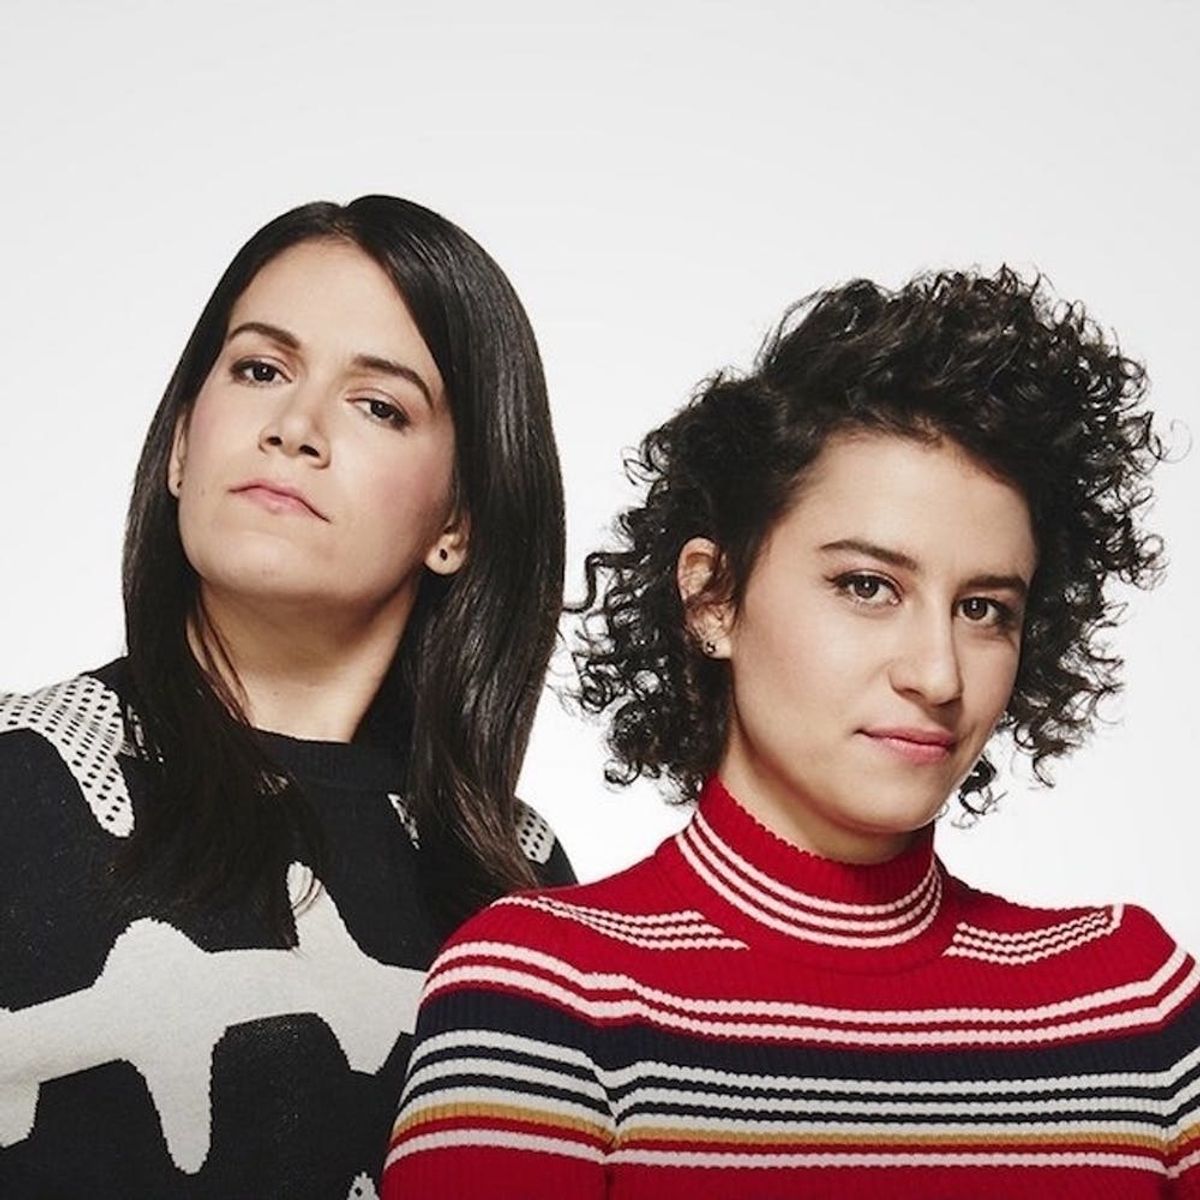 Get the Look of the Broad City Girls’ Eclectic NYC Apartment